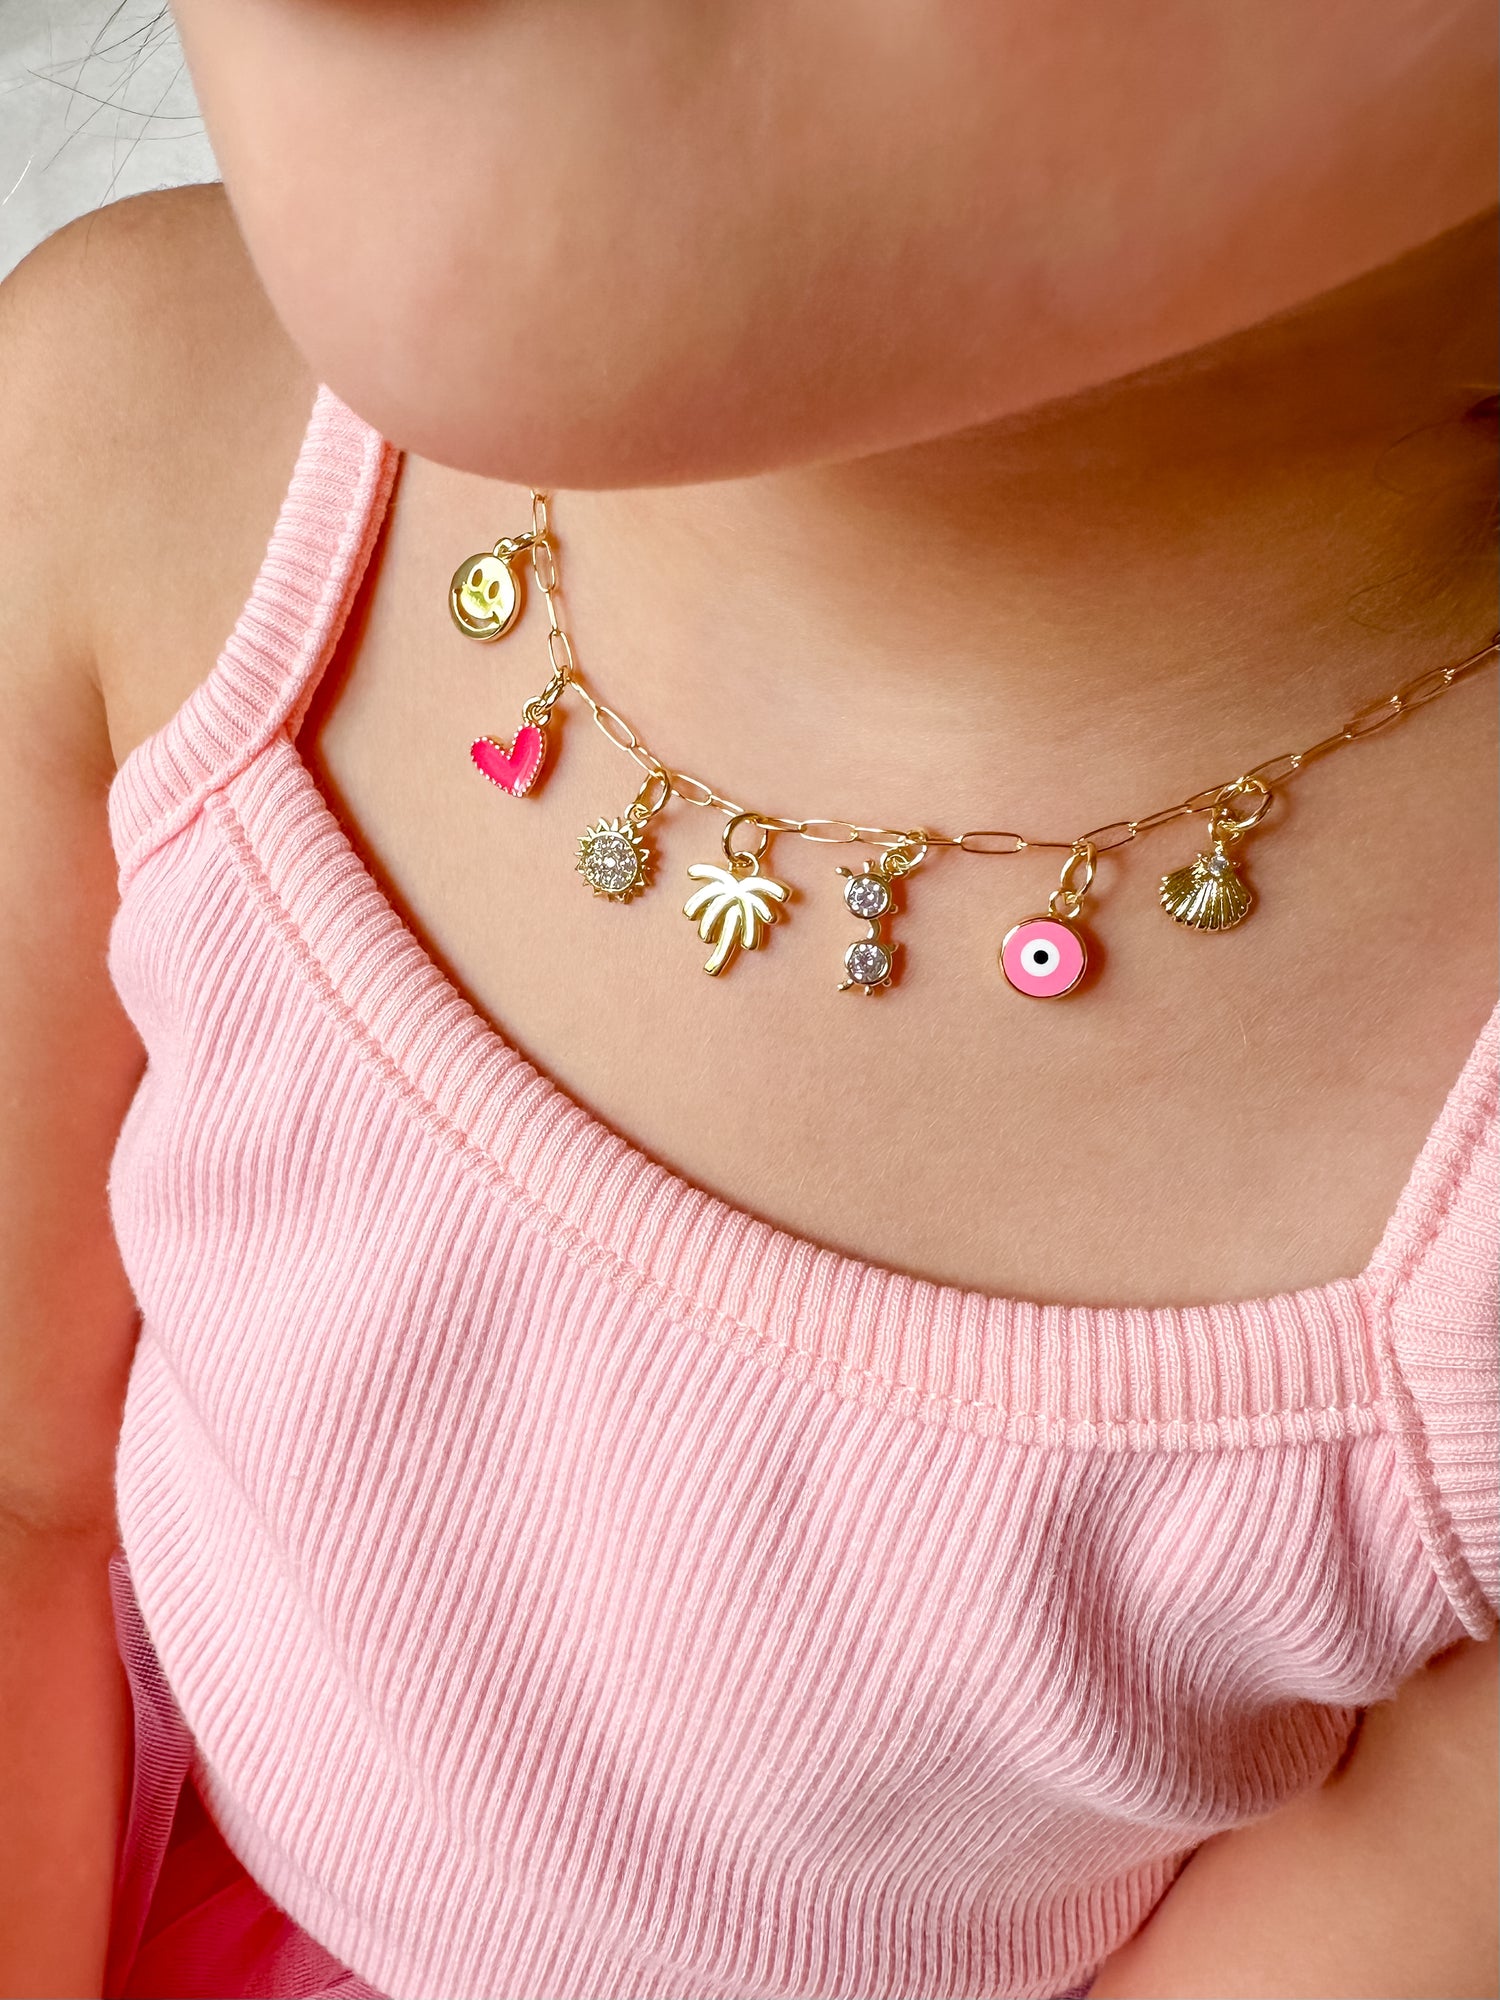 dainty summer charm necklace